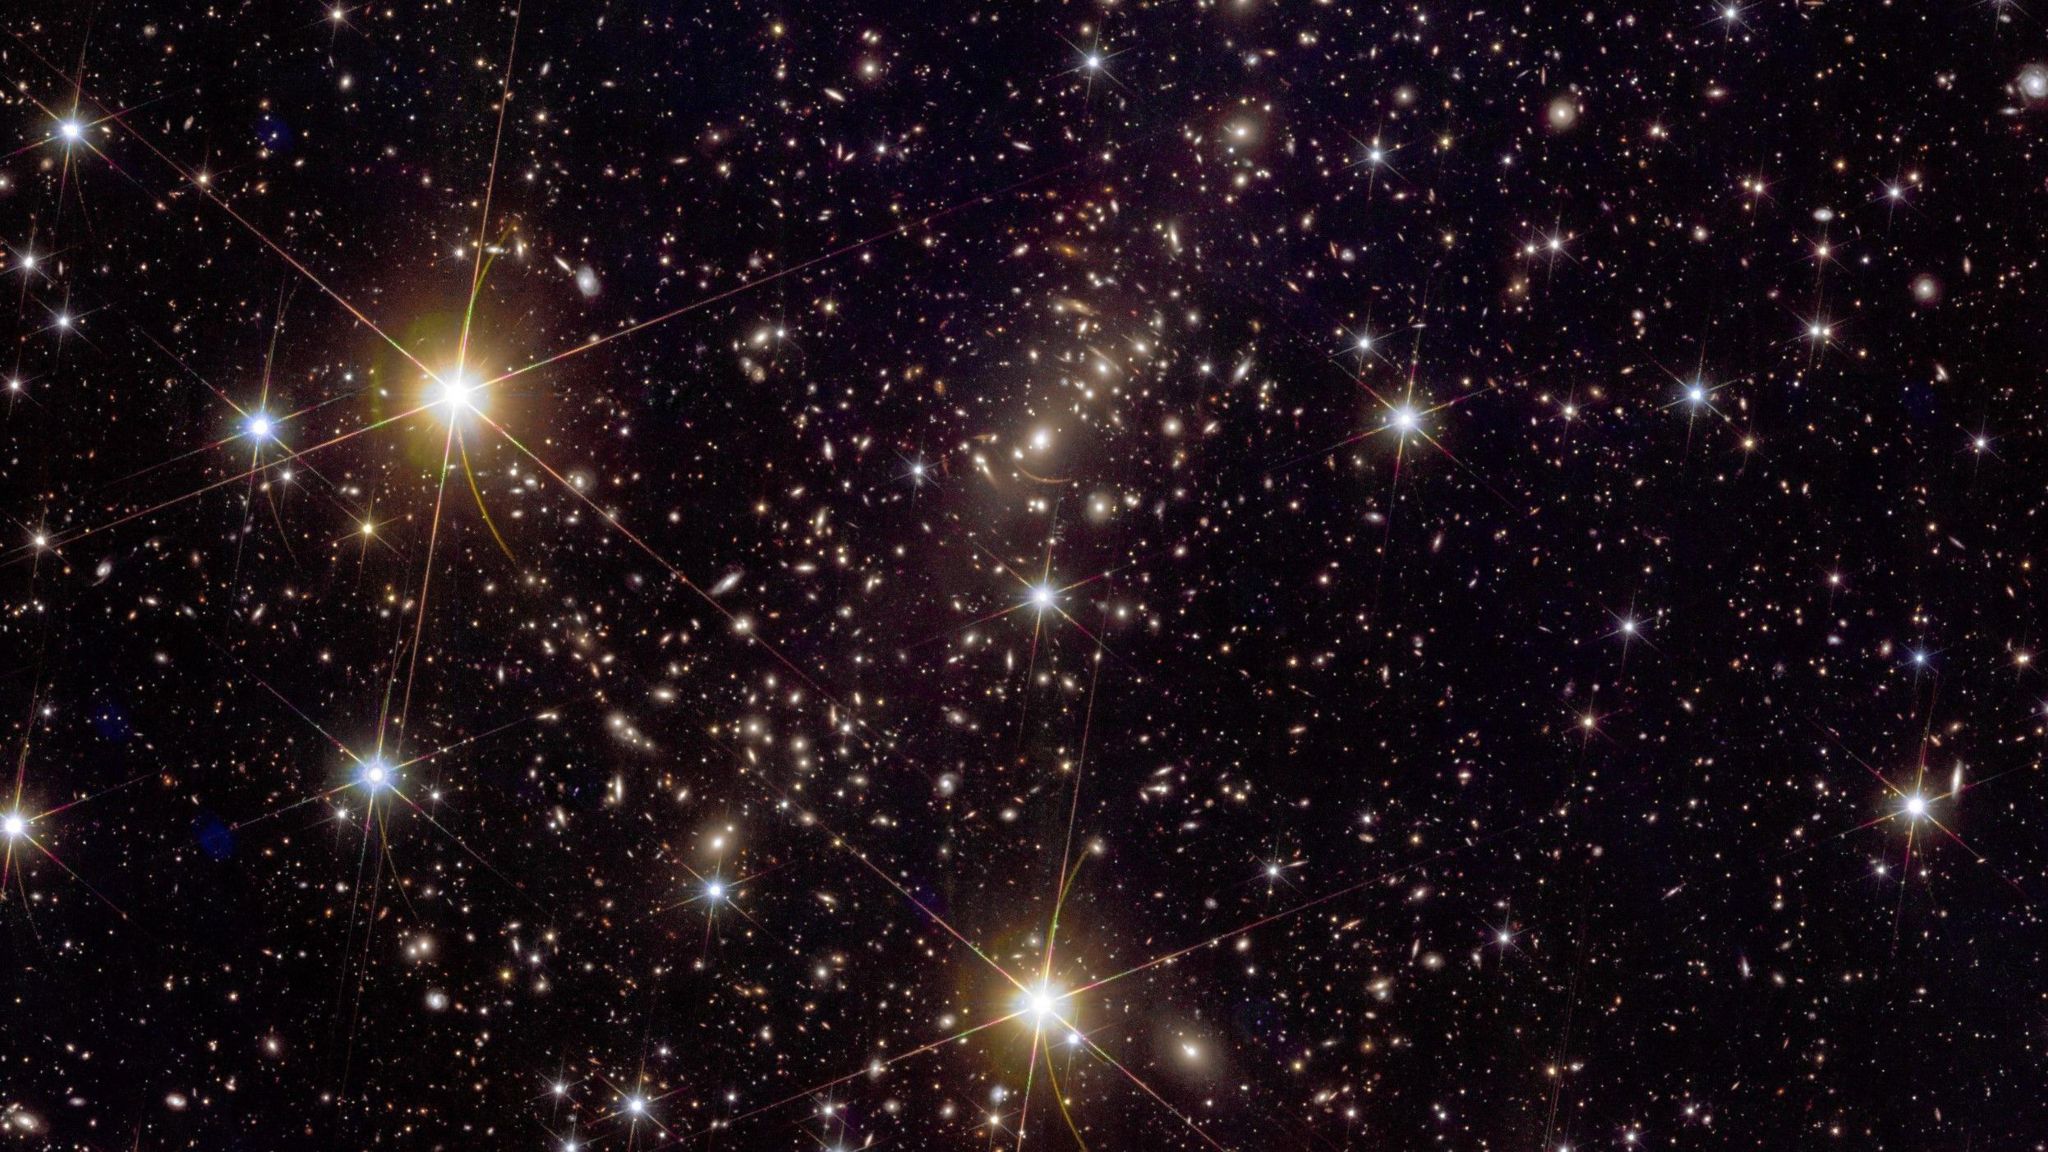 A smaller, close-up cutout from a wider frame featuring galaxy cluster Abell 2390